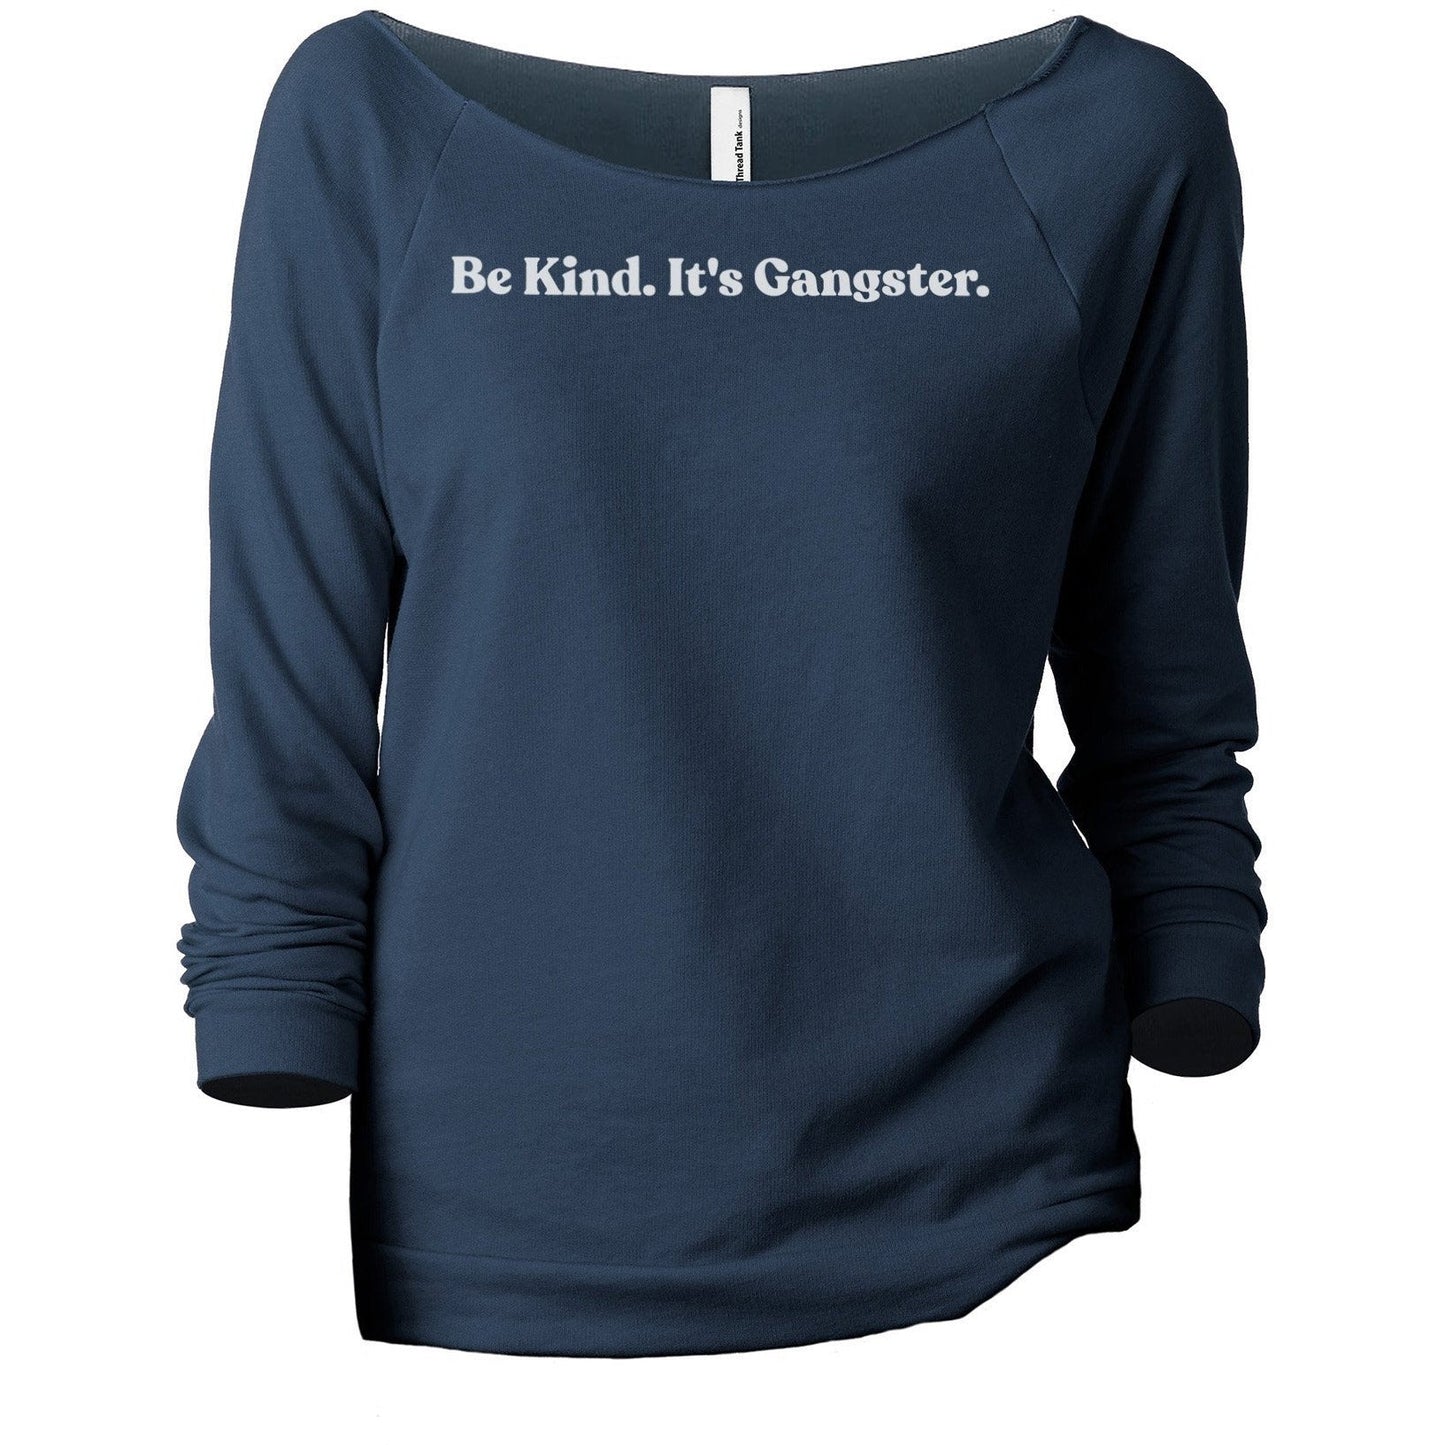 Be Kind It's Gangster - Stories You Can Wear